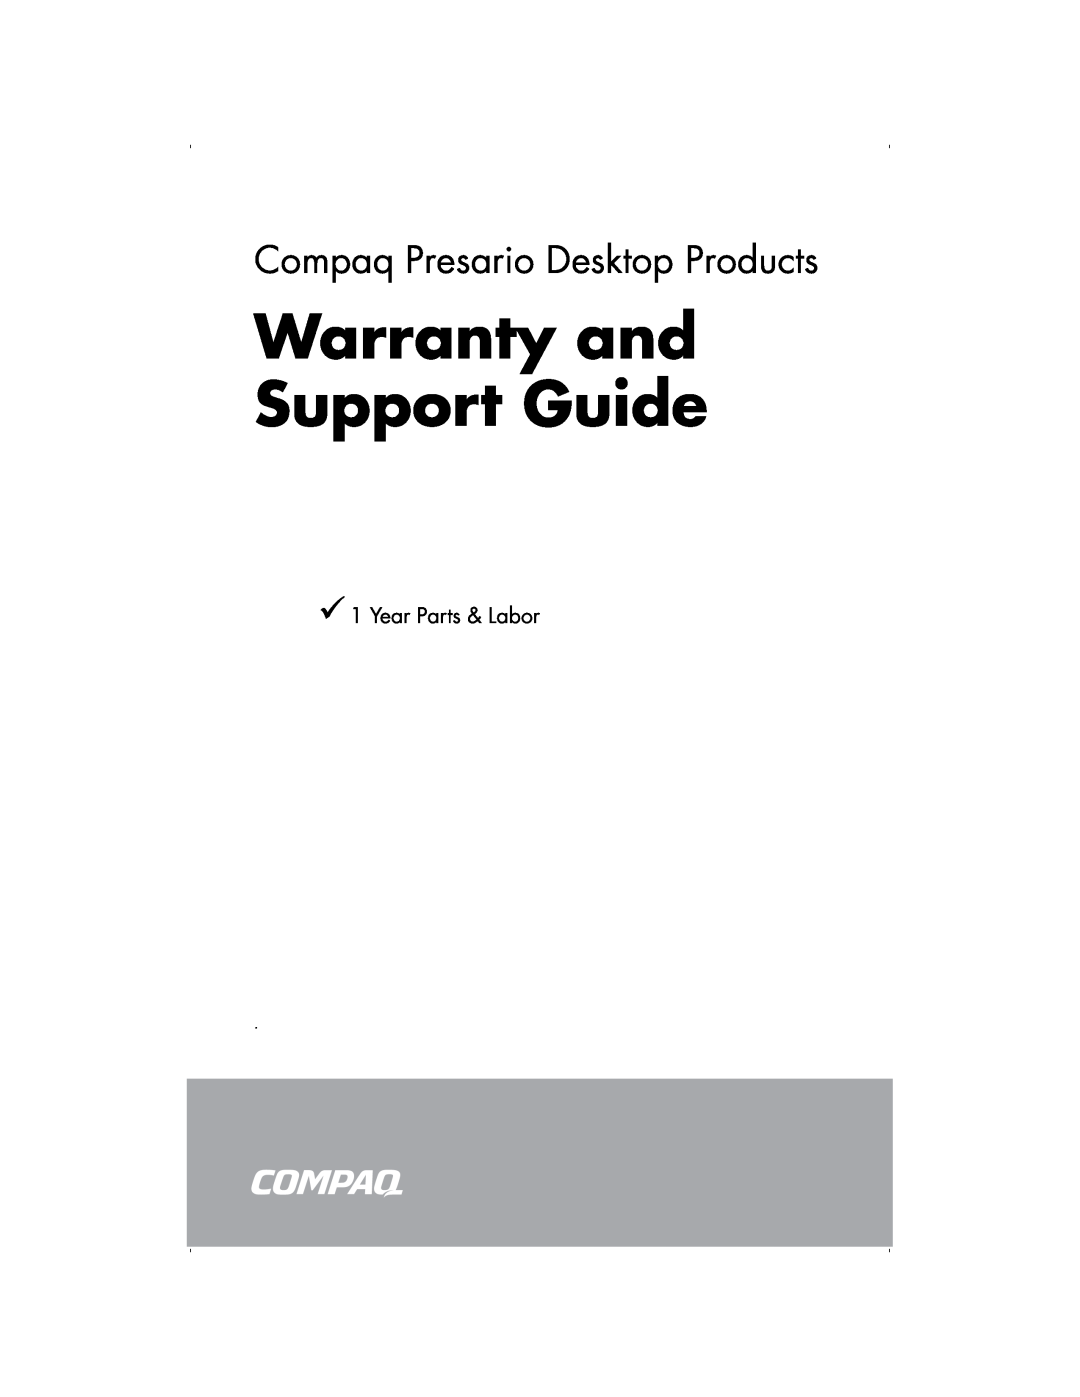 HP S4100UK, S3750UK, S4150UK manual Warranty and Support Guide, Compaq Presario Desktop Products, Year Parts & Labor 